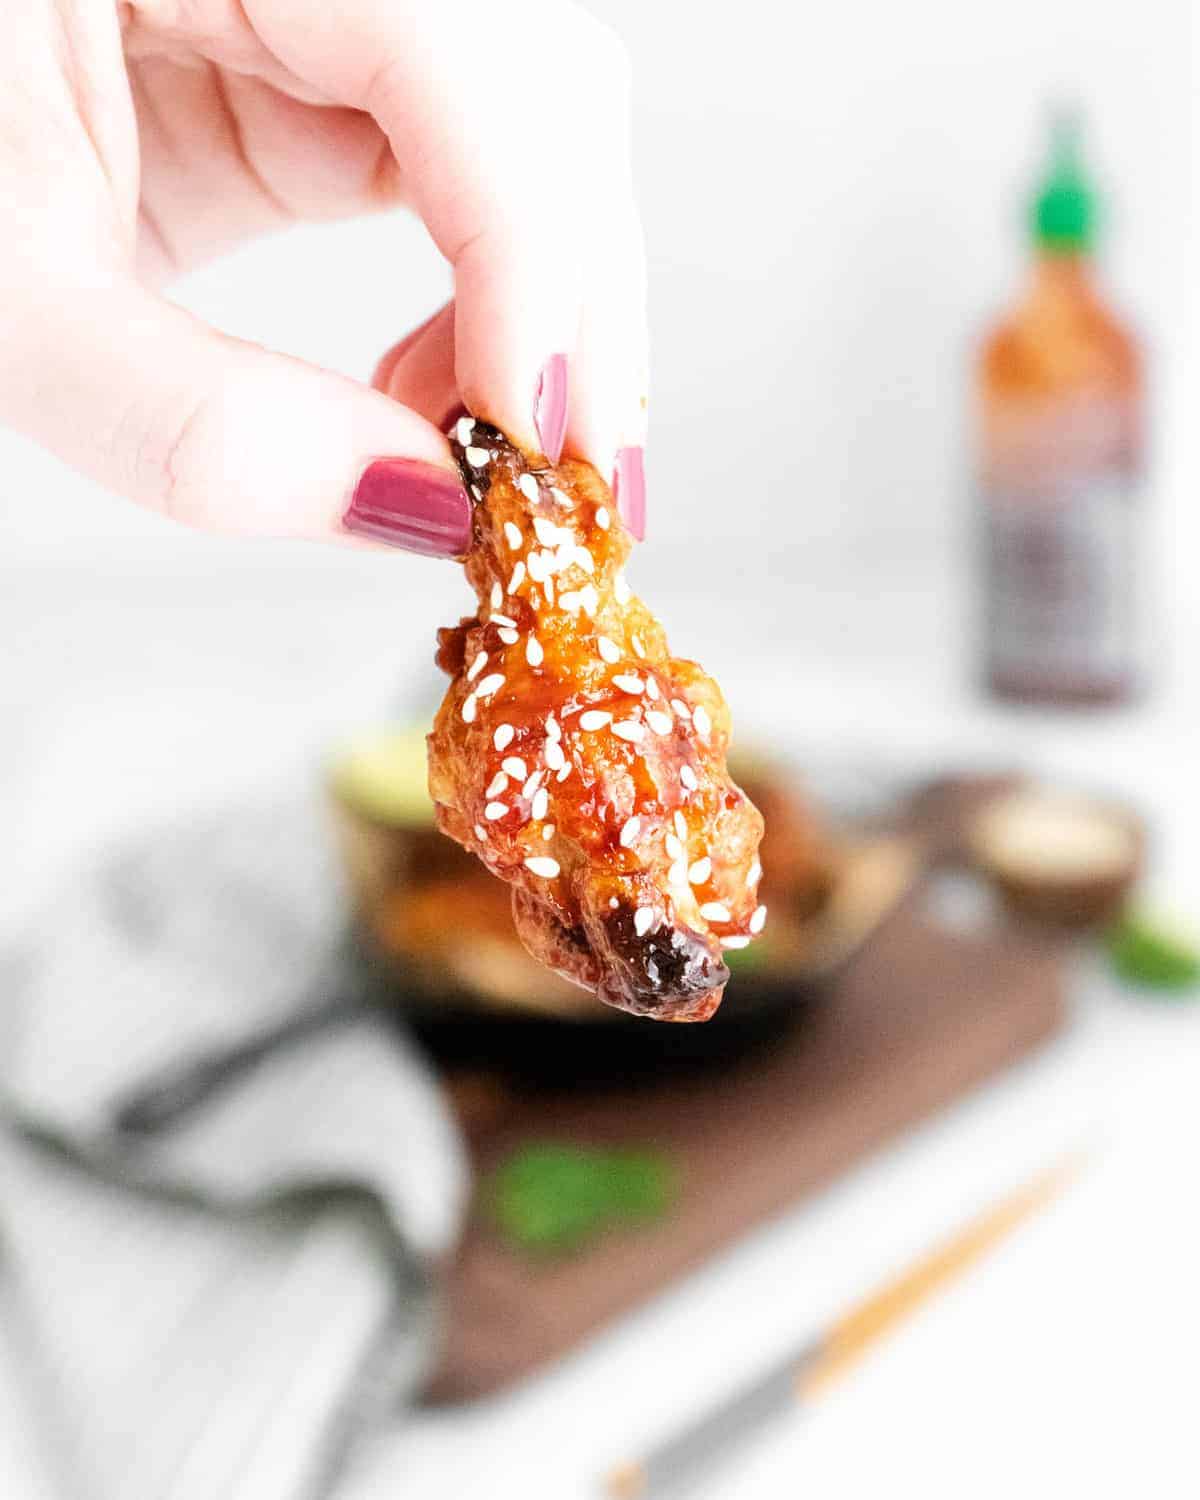 Hand holding a wing sprinkled with sesame seeds.